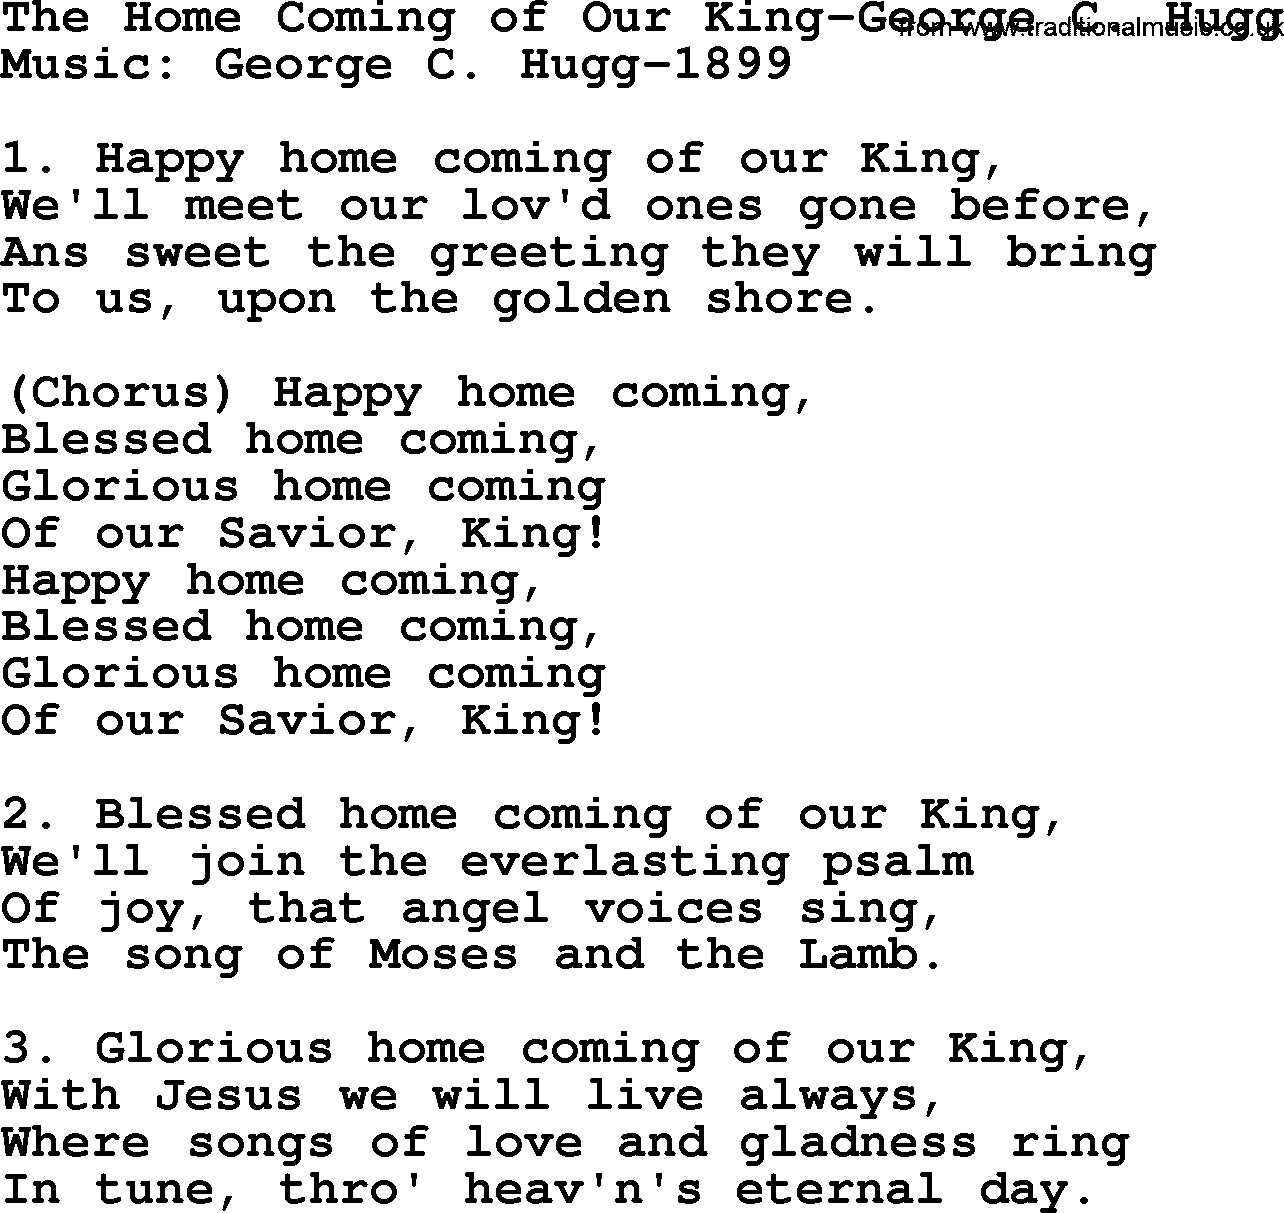 Hymns about Angels, Hymn: The Home Coming Of Our King-george C. Hugg.txt lyrics with PDF